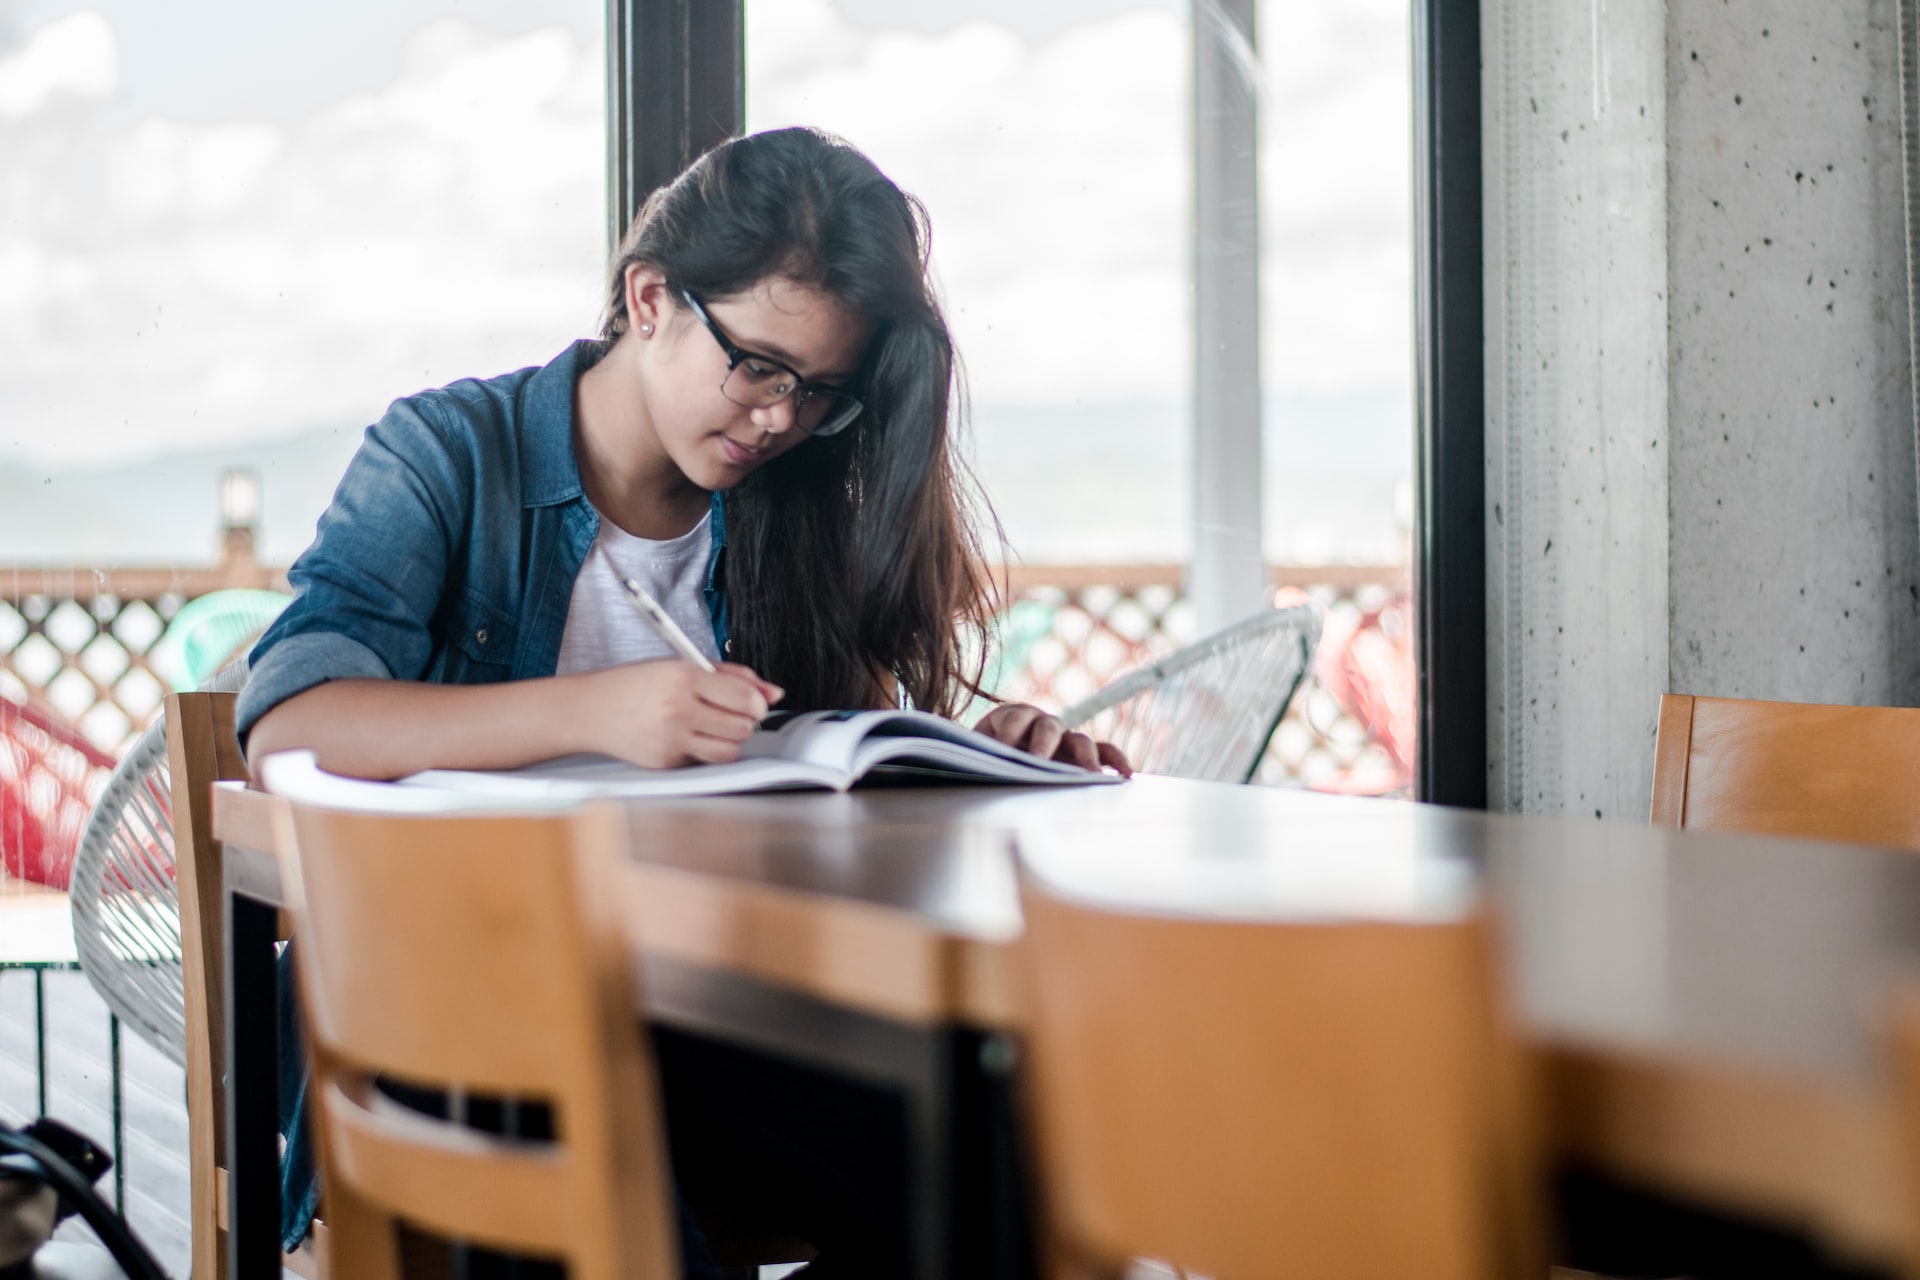 5 Tips for Successfully Studying in College